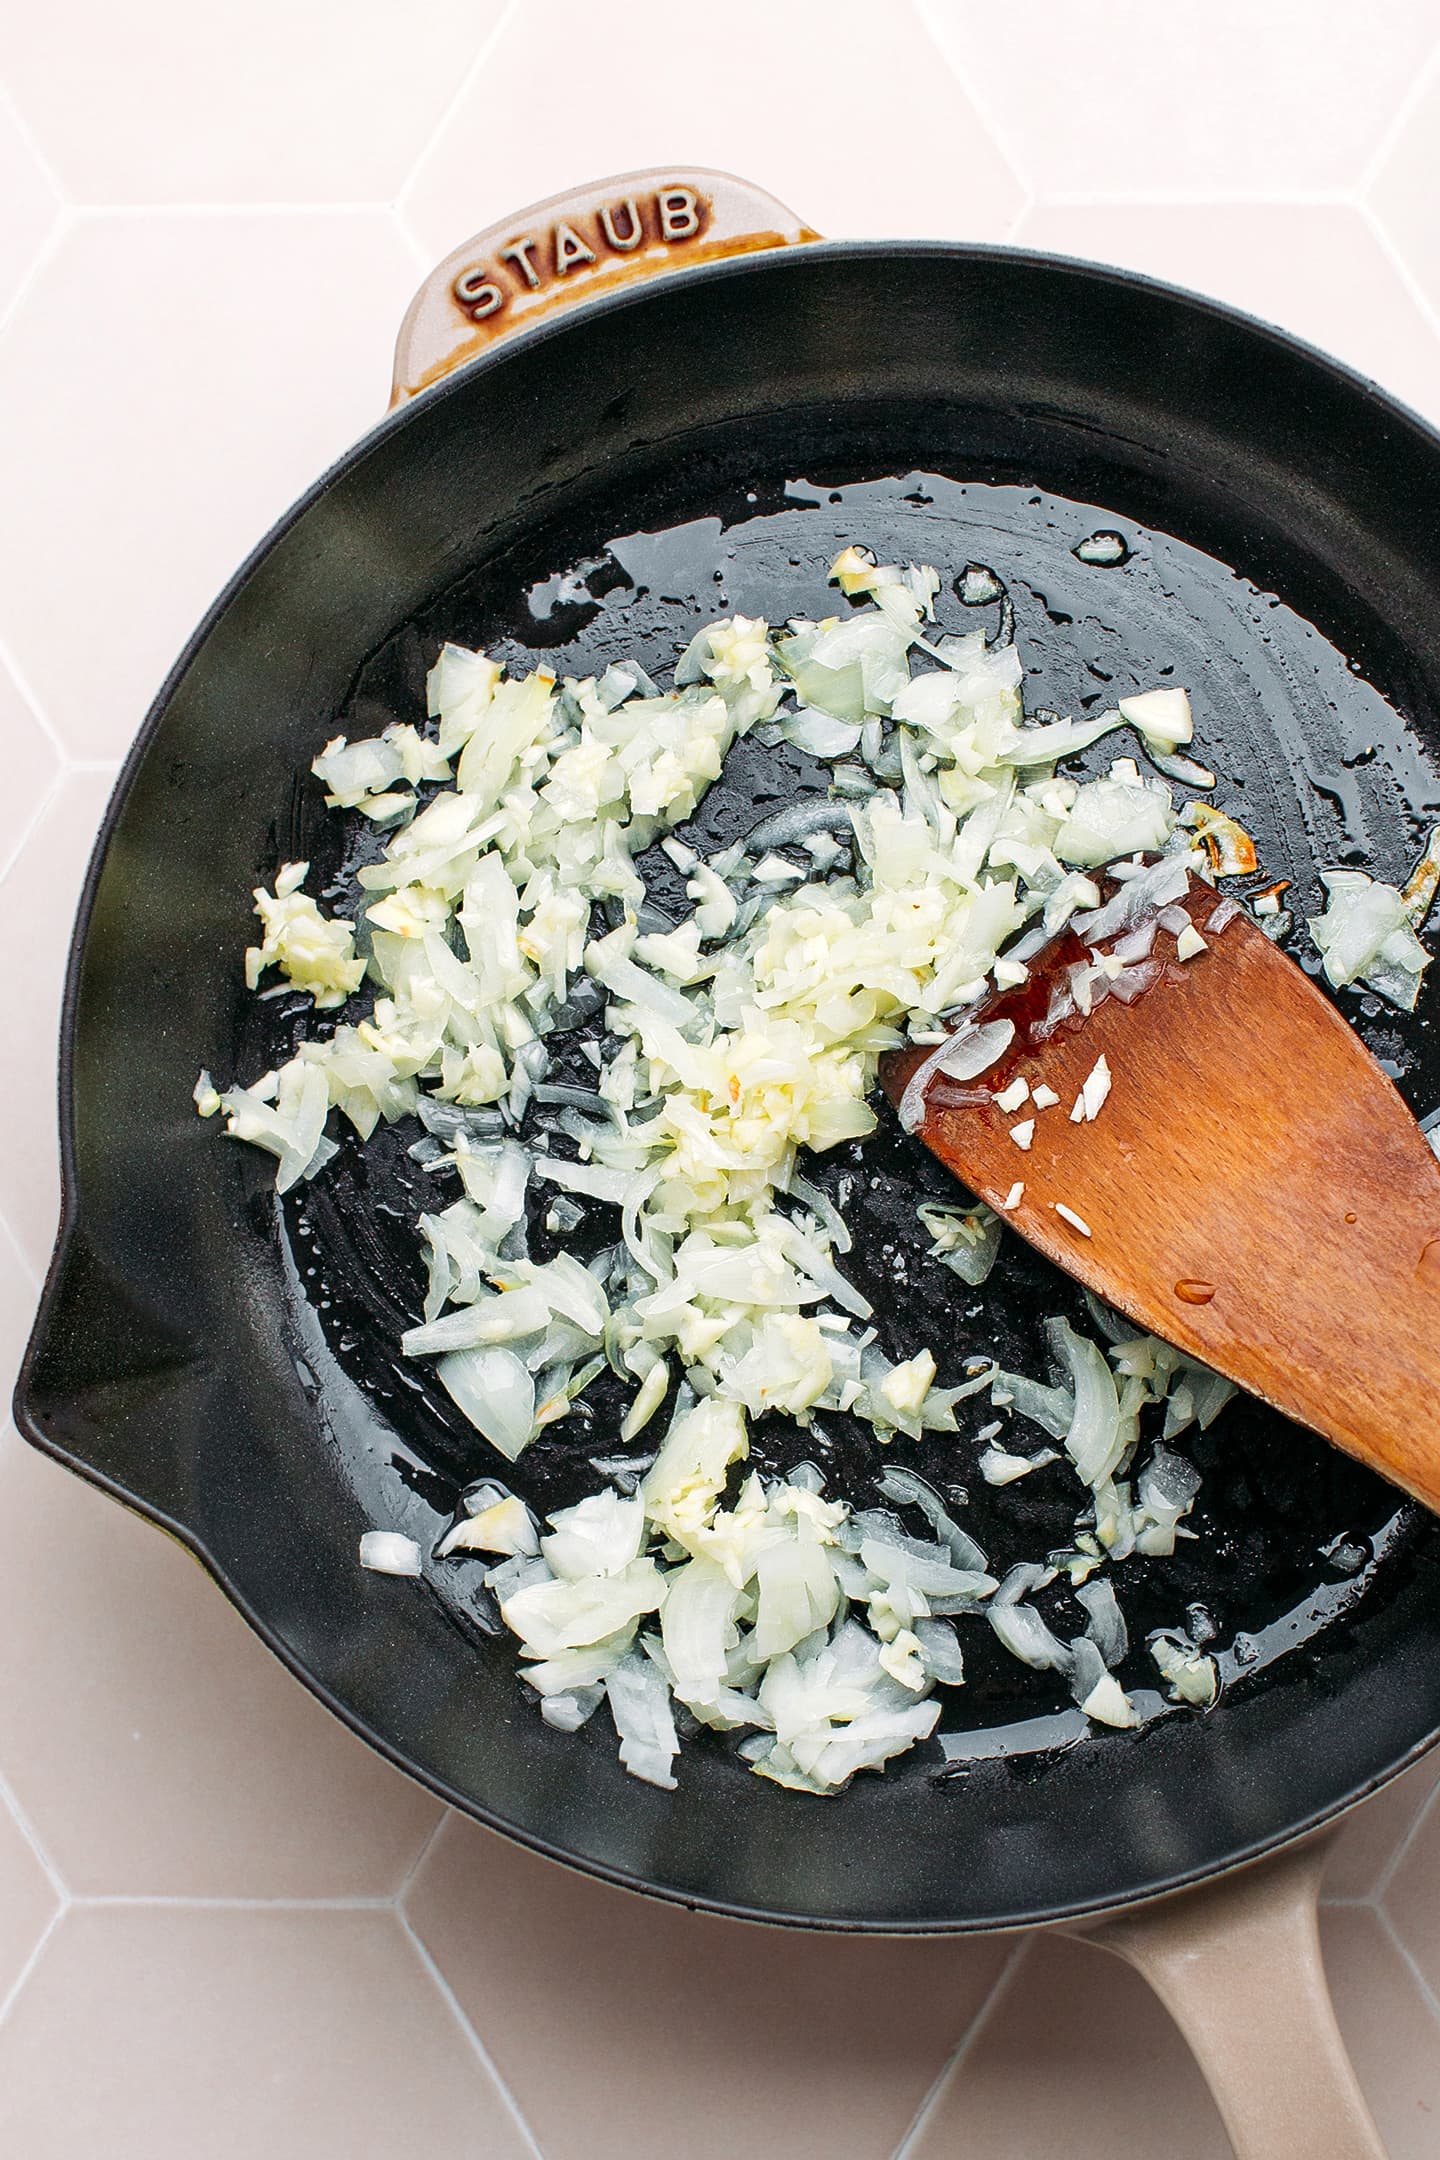 Onion and garlic in a pan.